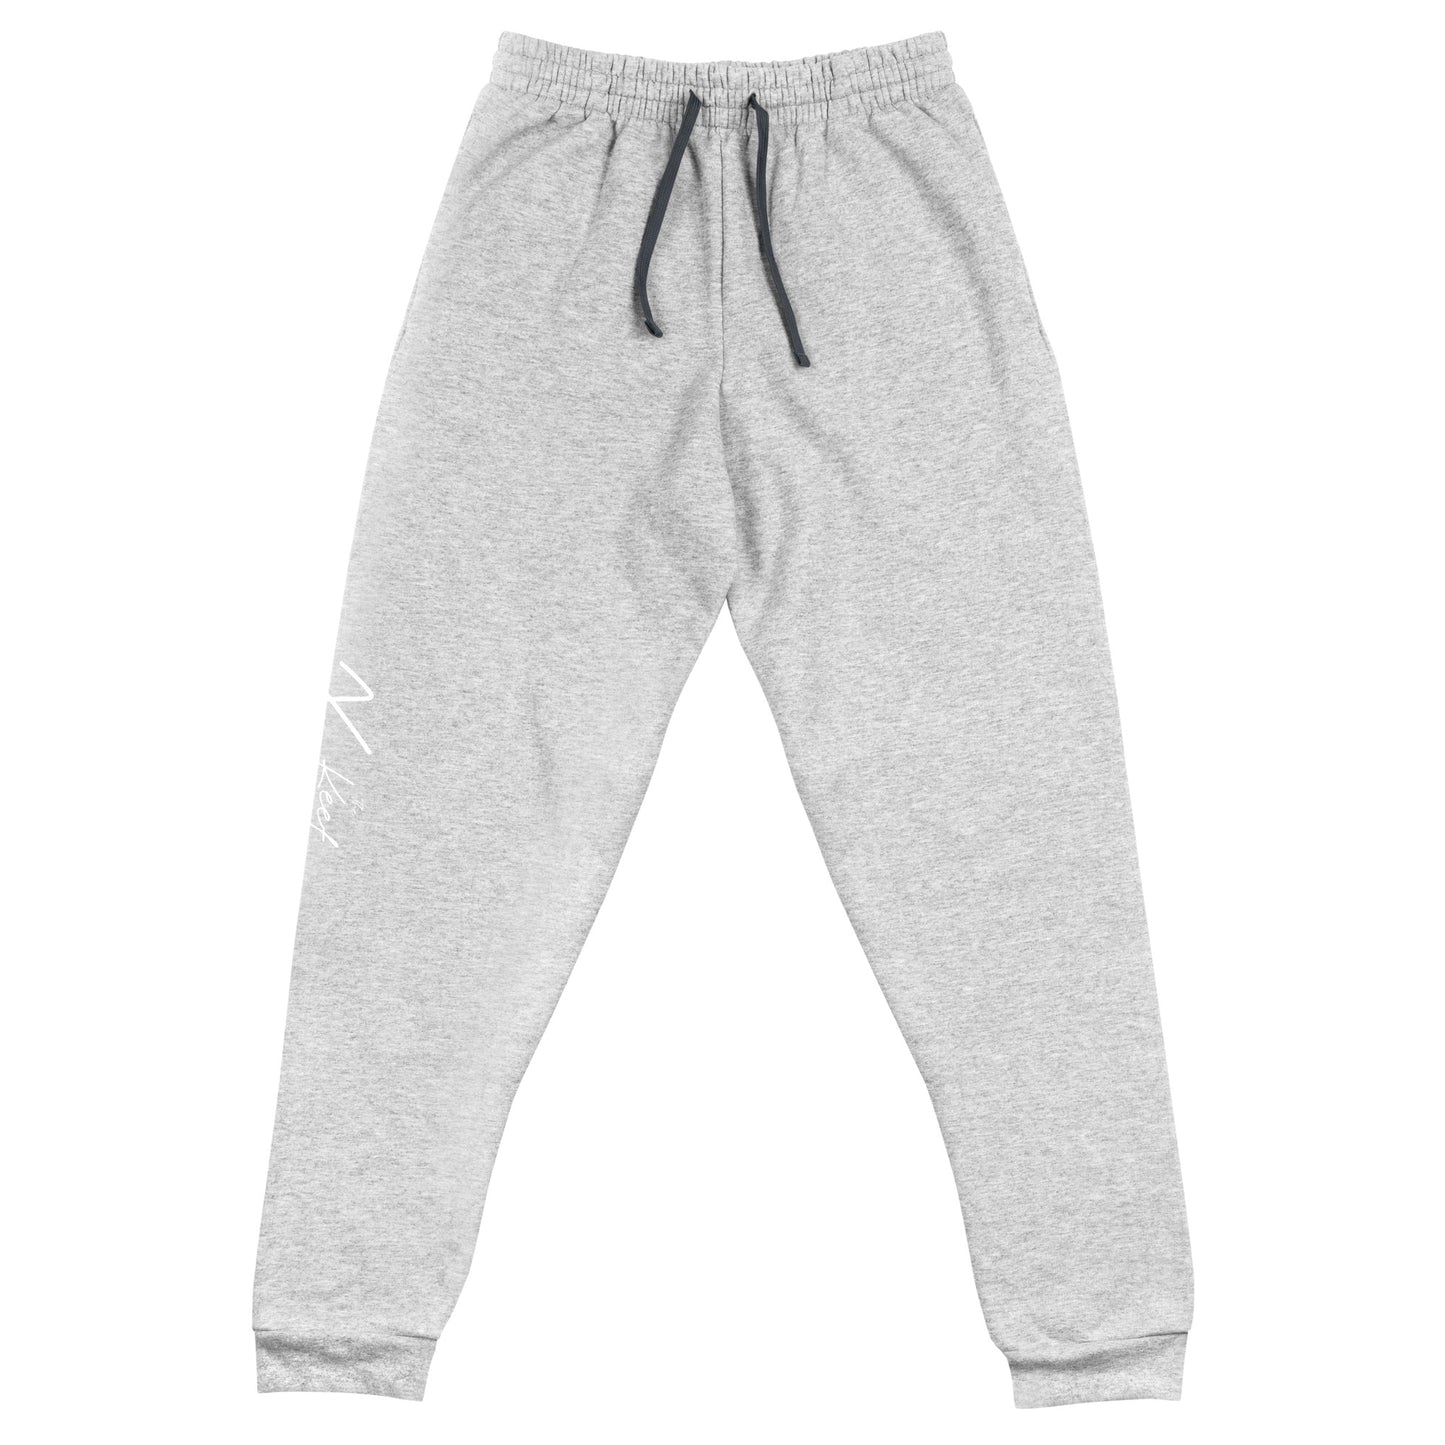 Keef Xperience Unisex Joggers